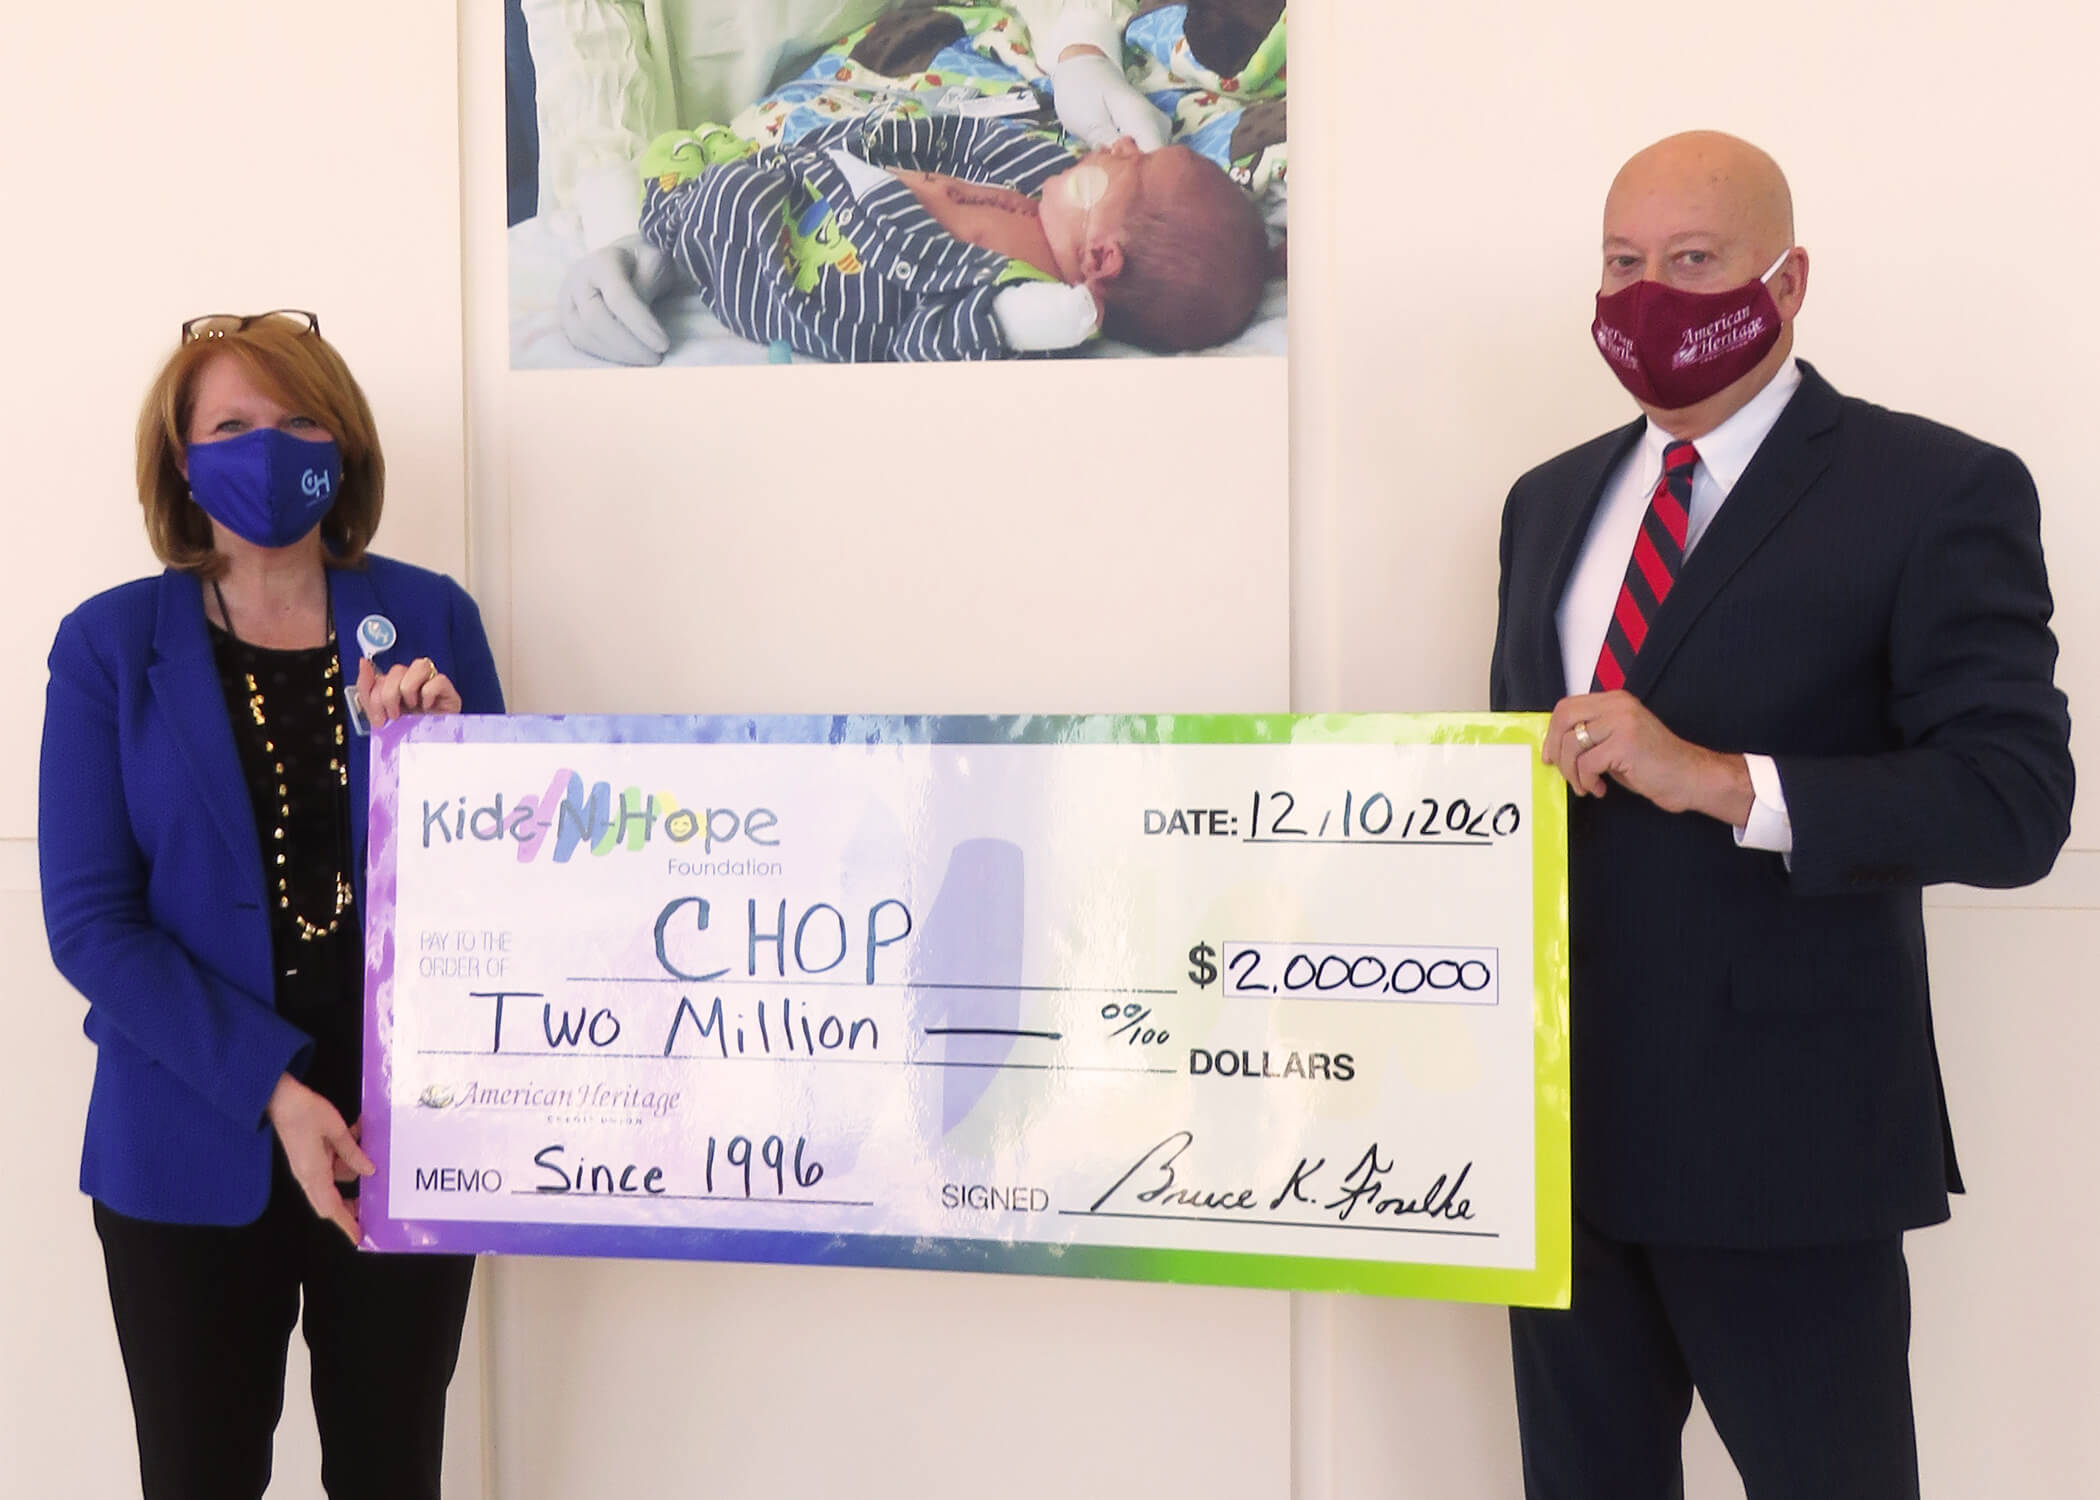 Bruce K. Foulke, Chairman of the Kids-N-Hope Foundation, presents a contribution representing $2 million in cumulative donations to Children’s Hospital of Philadelphia President & CEO, Madeline Bell.